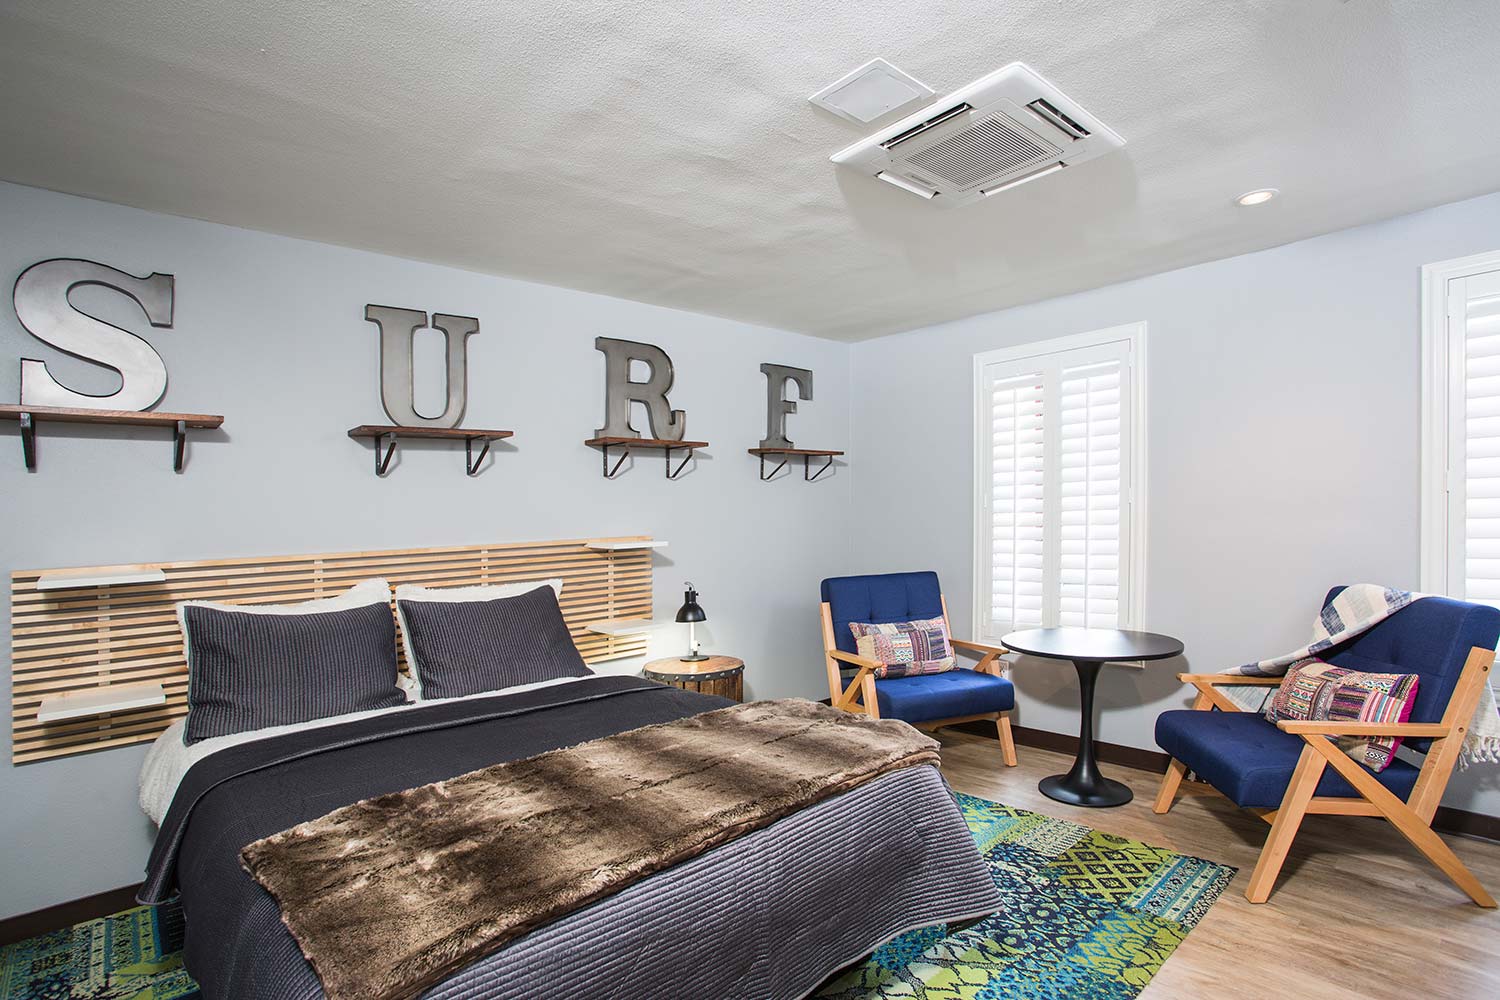 the executive suite at HI Los Angeles Santa Monica hostel is a large private room with a queen-sized bed, seating area, large ensuite bathroom, and beach-themed decor